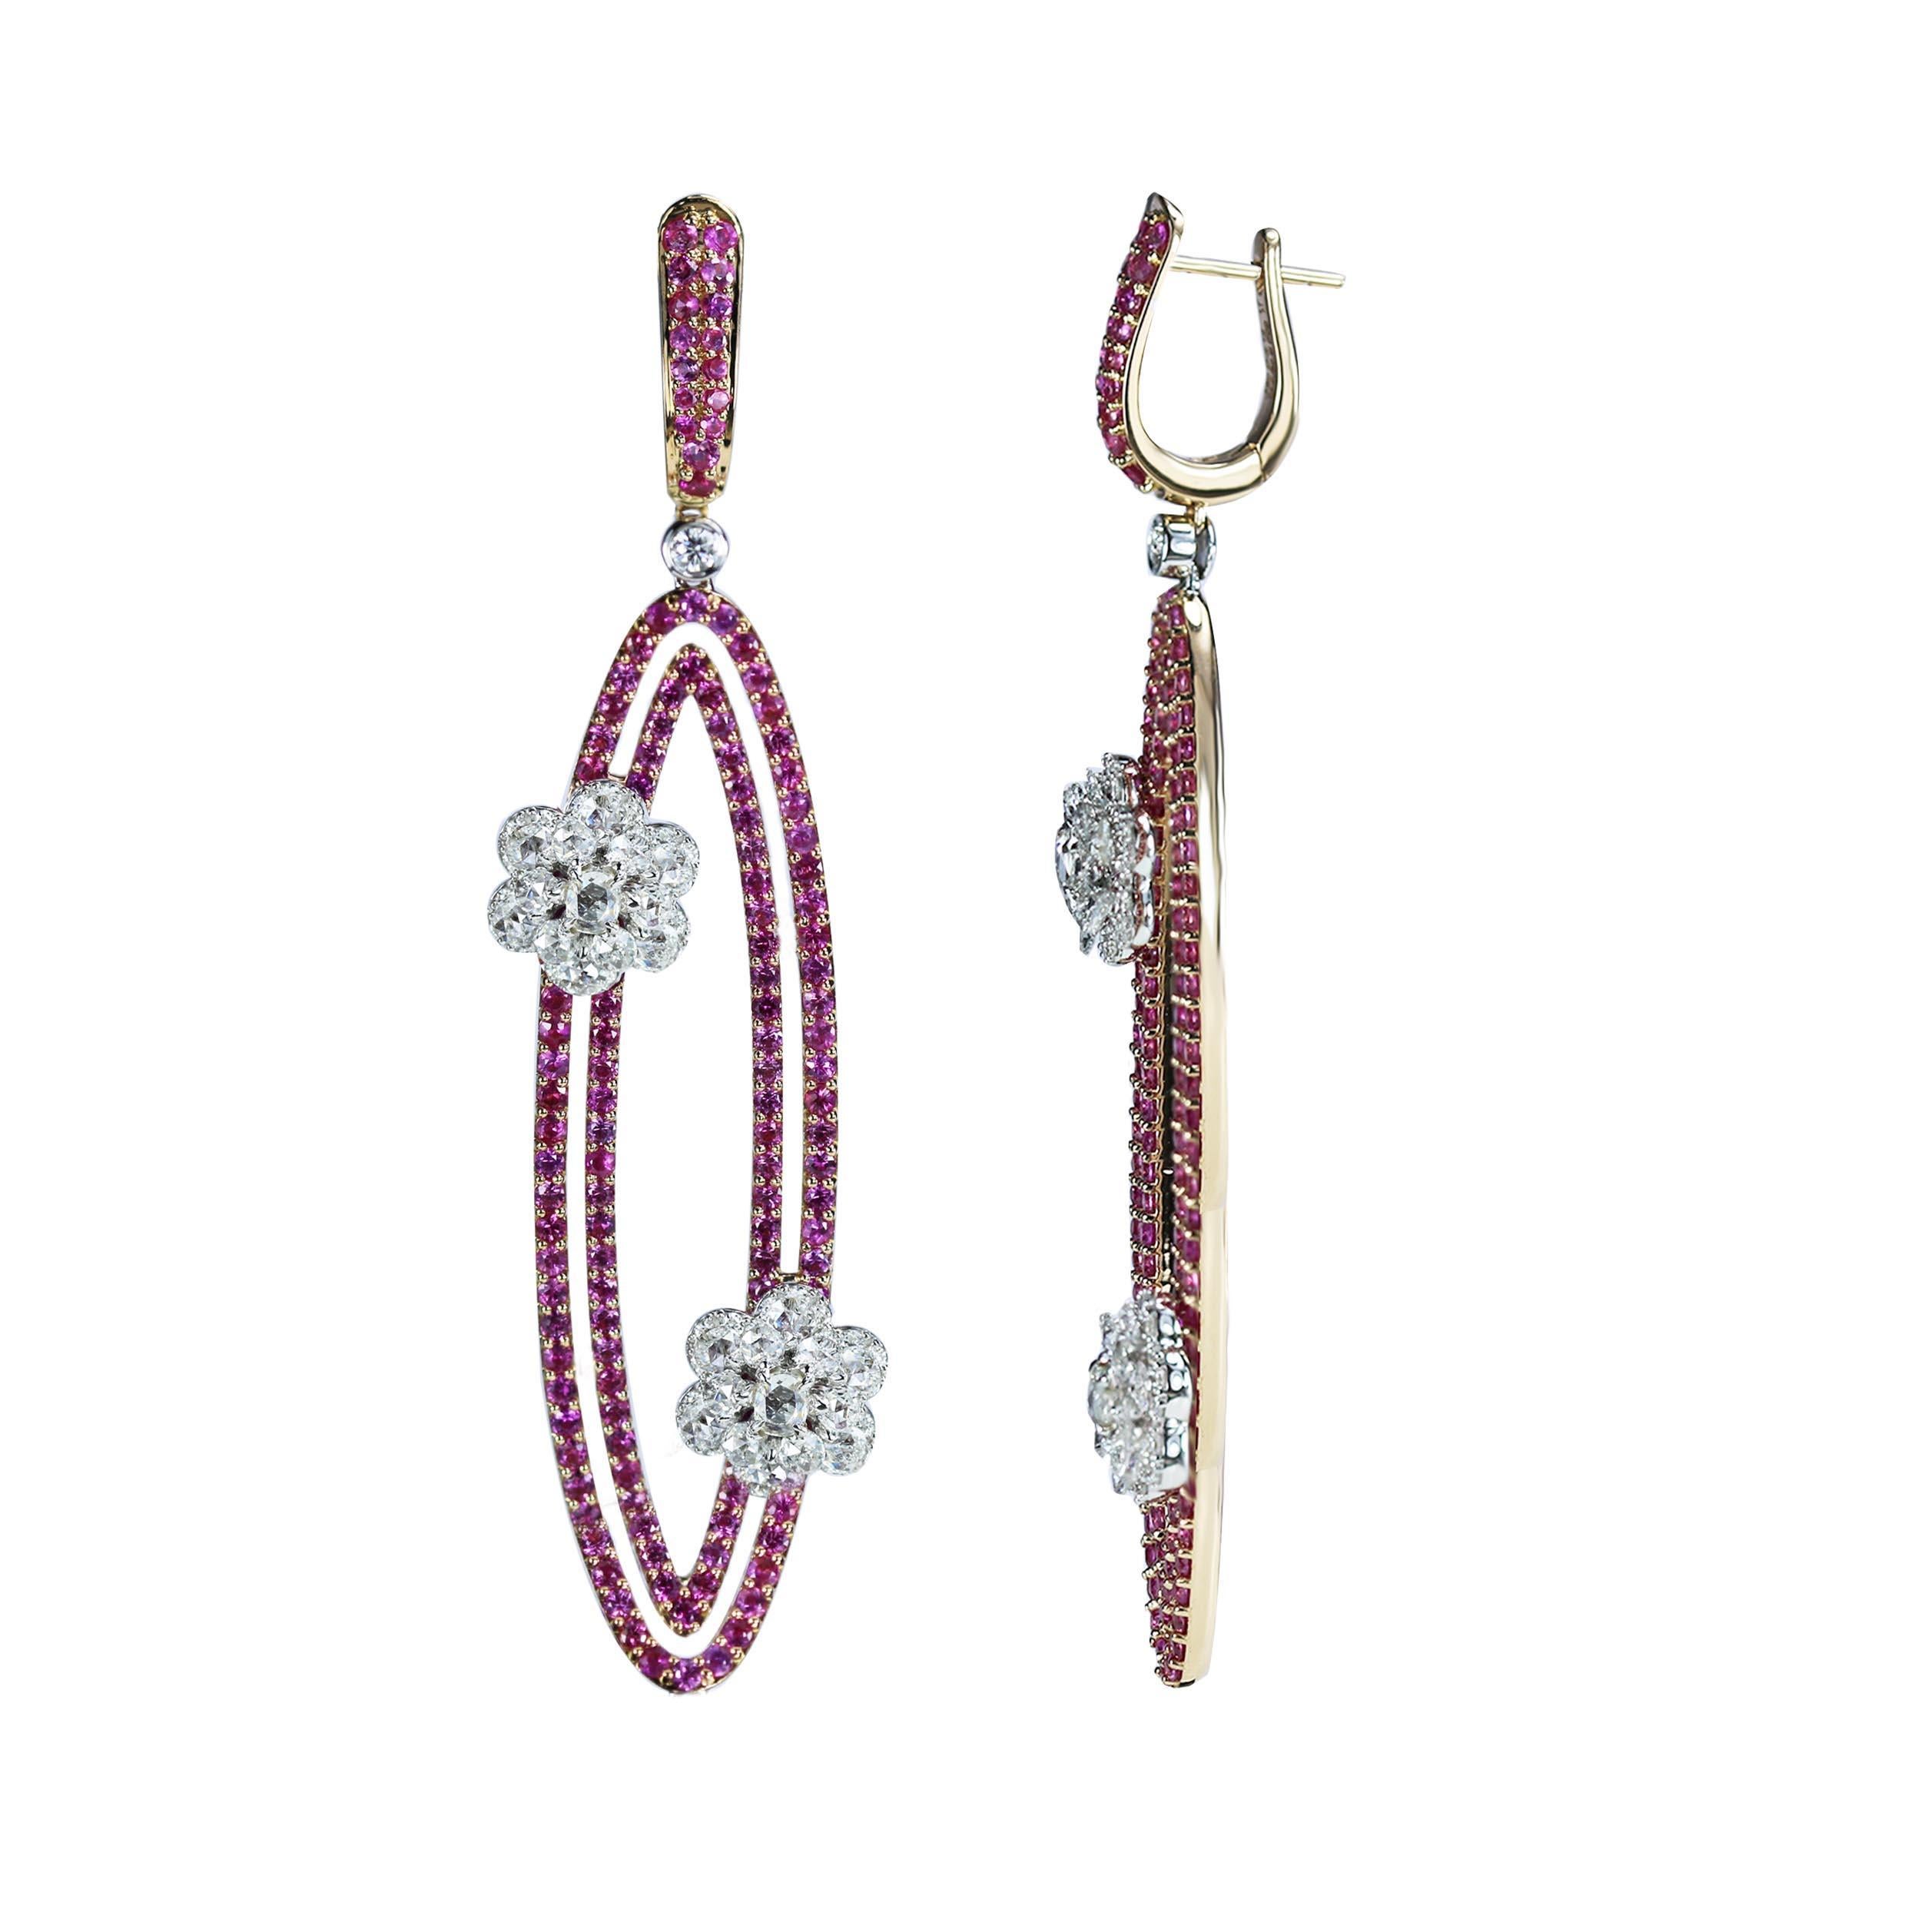 Diamond and Pink Sapphire Earrings

Geometry and nature inspirations come together in these earrings that are one for the ages. Beaded pink sapphires form oval loops that are brought together with floral motifs composed of round, oval, rose cut and